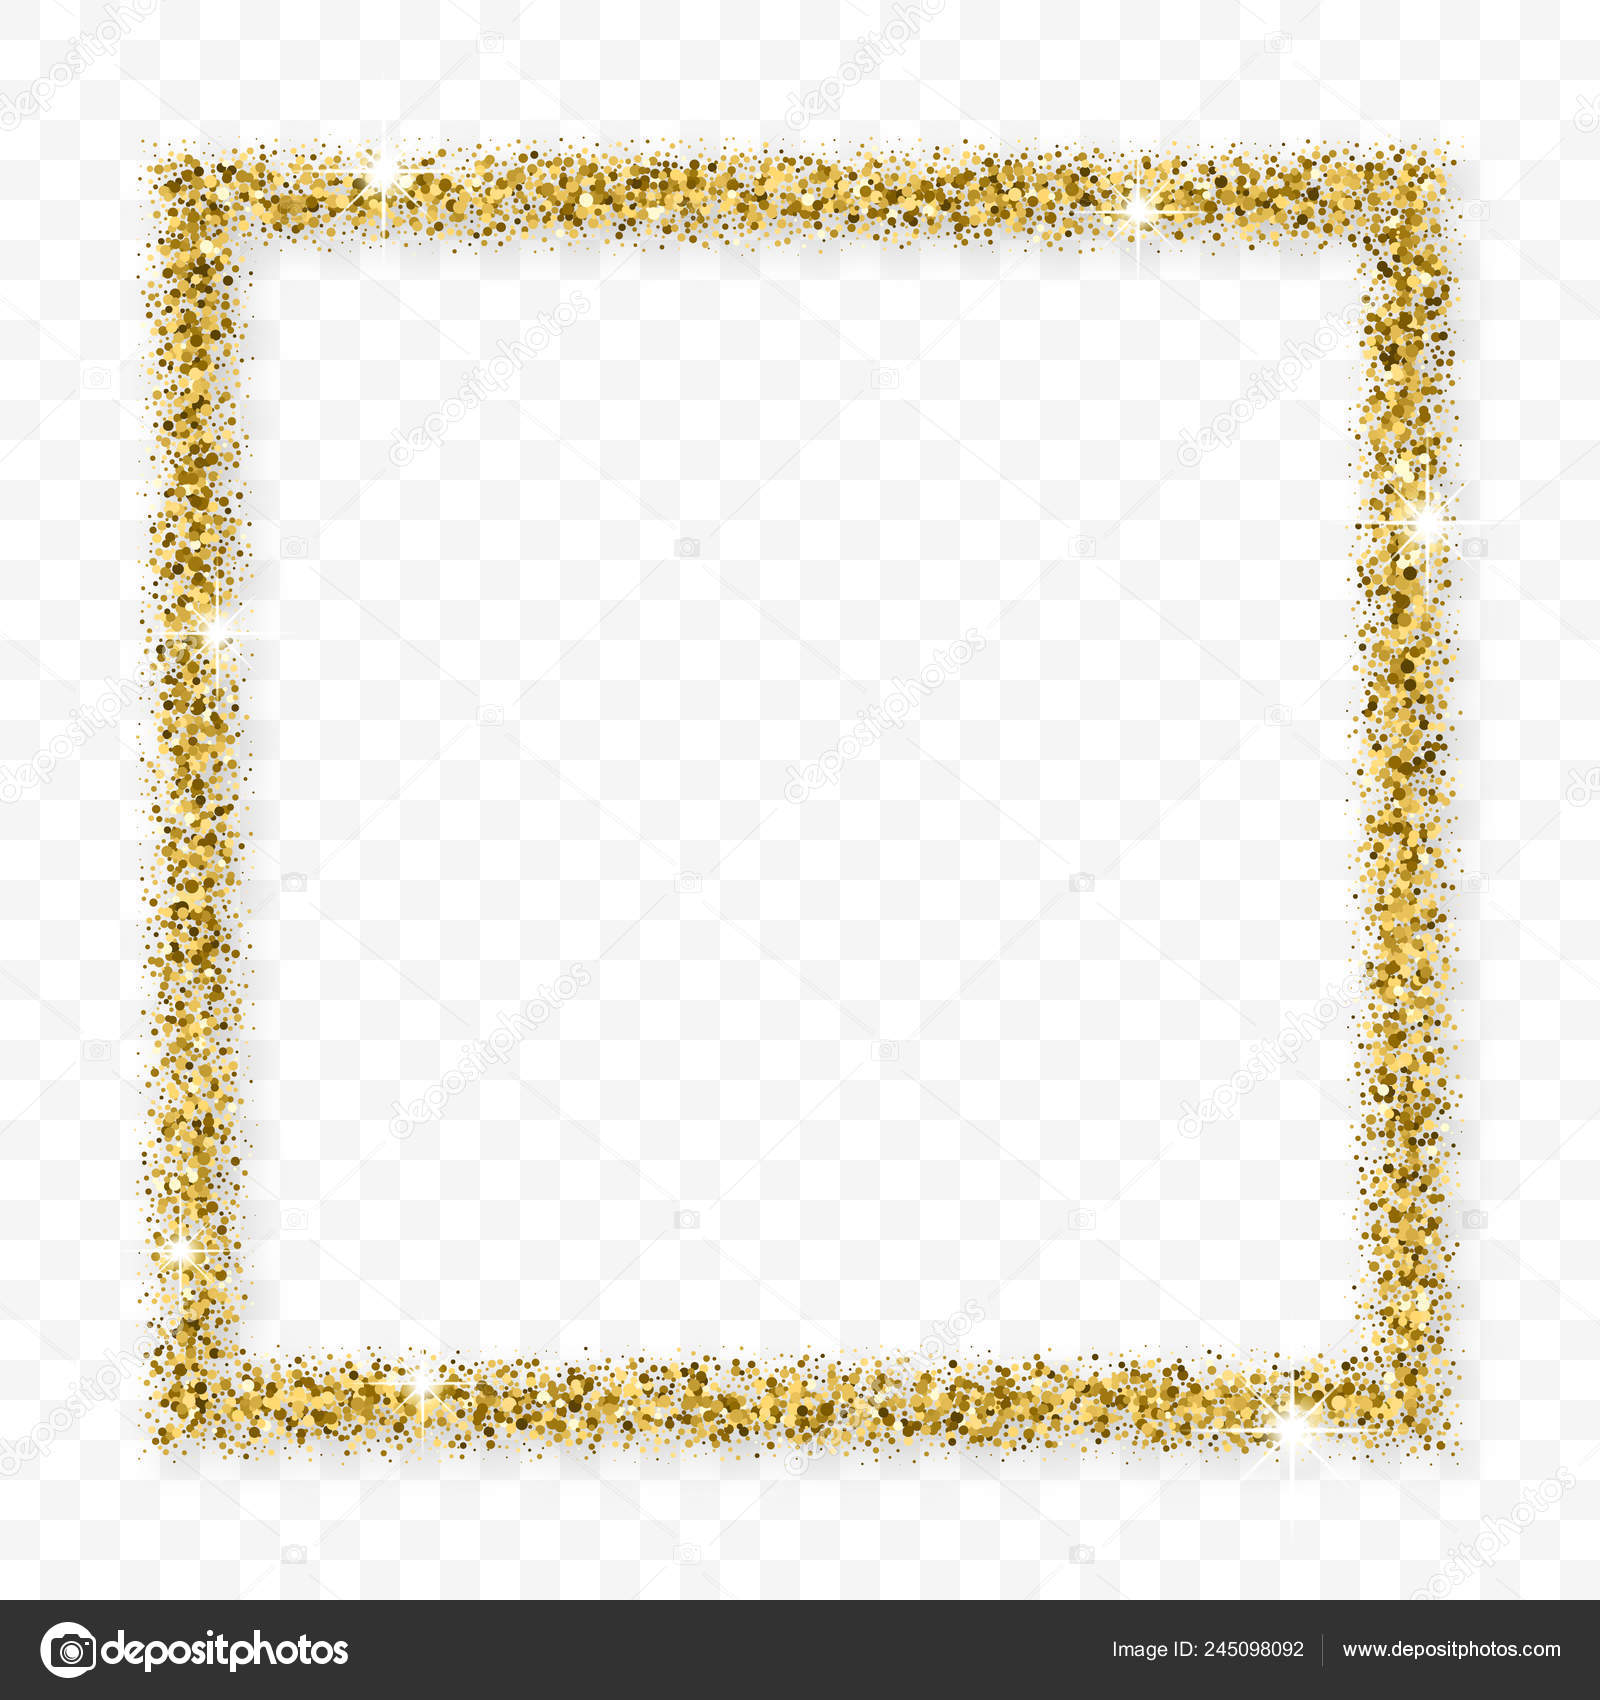 Falling Shiny Gold Glitter Confetti isolated on transparent background.  Stock Vector